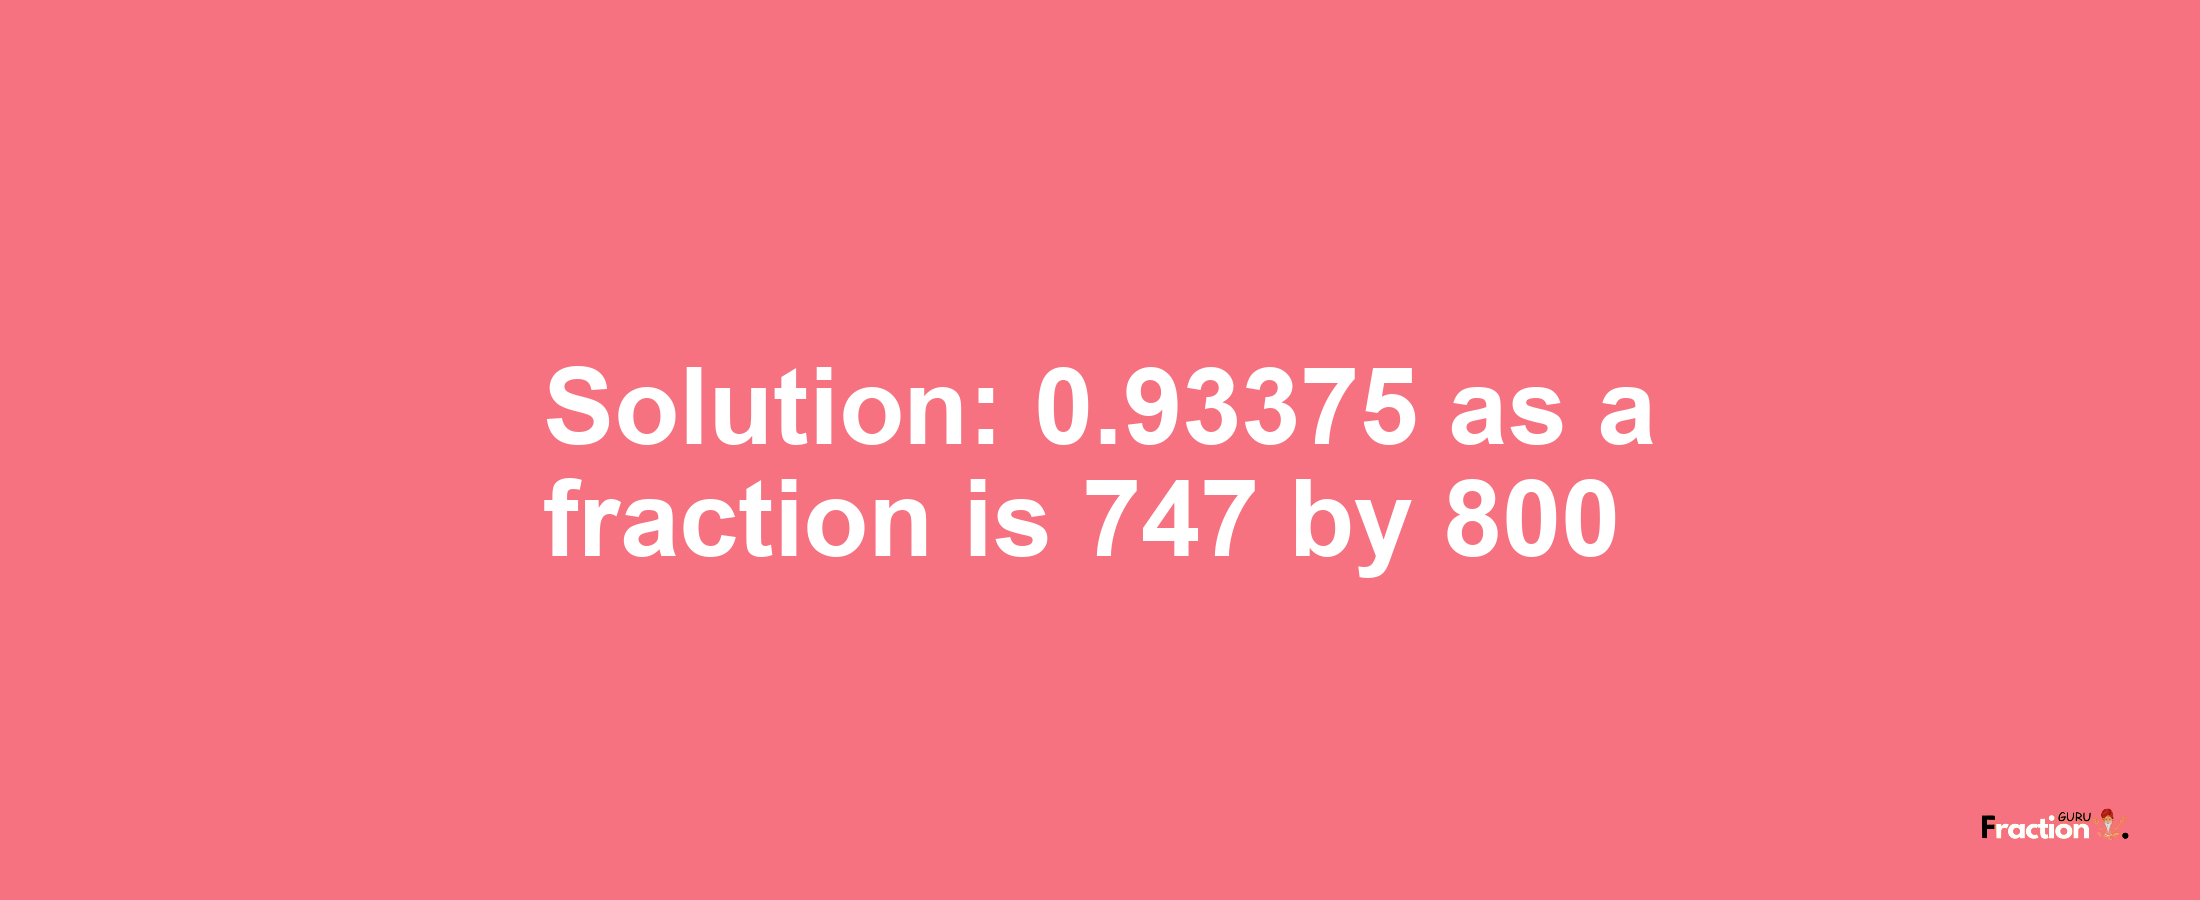 Solution:0.93375 as a fraction is 747/800